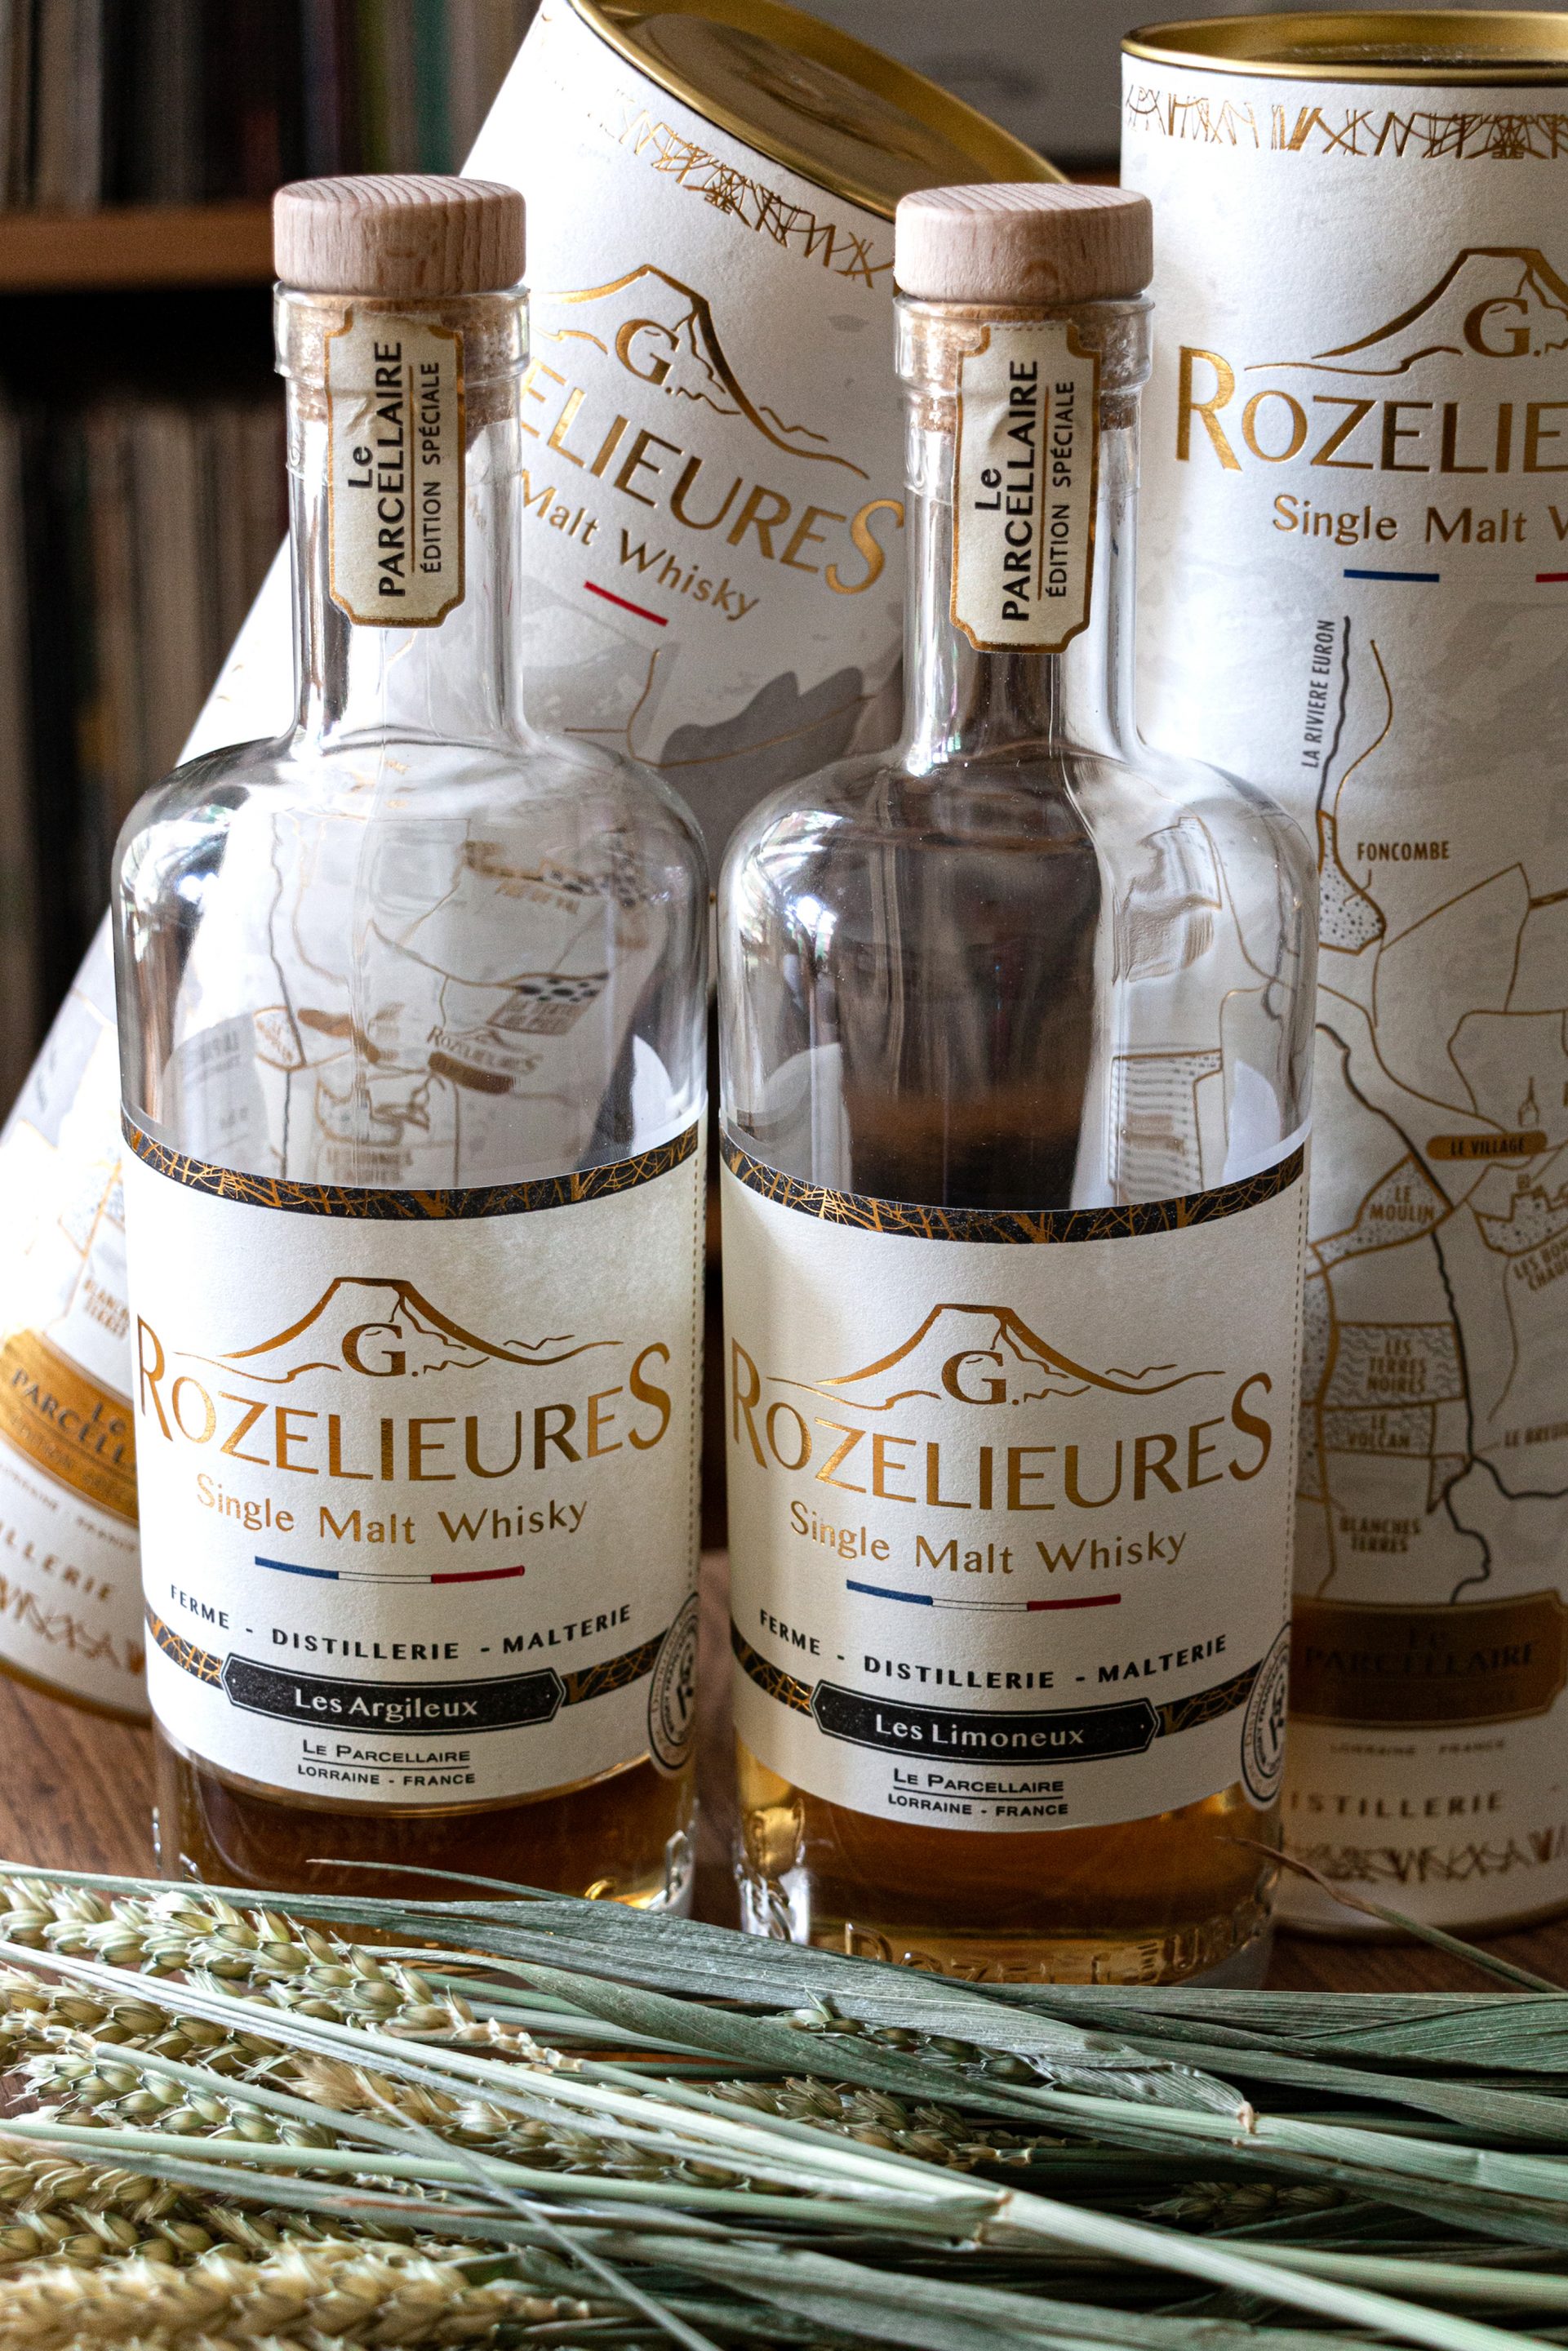 Whiksy Parcellaire - Whisky Rozelieures